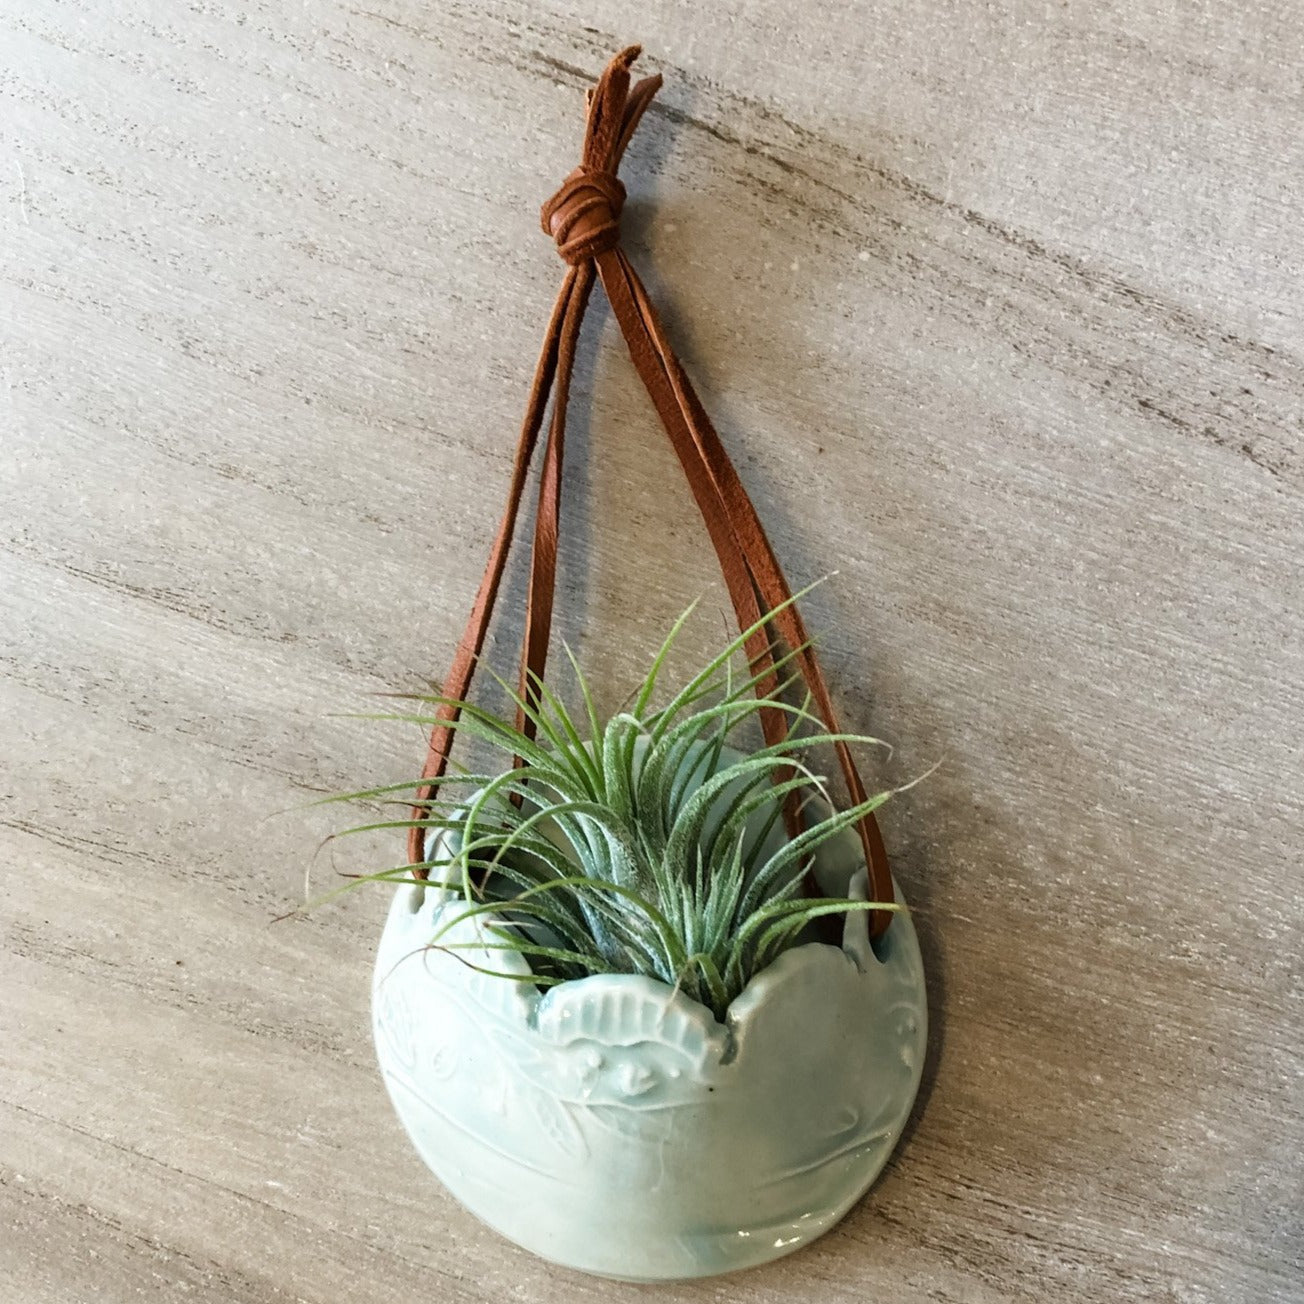 Ceramic Hanging Air Plant Holder - Multiple Colors Available